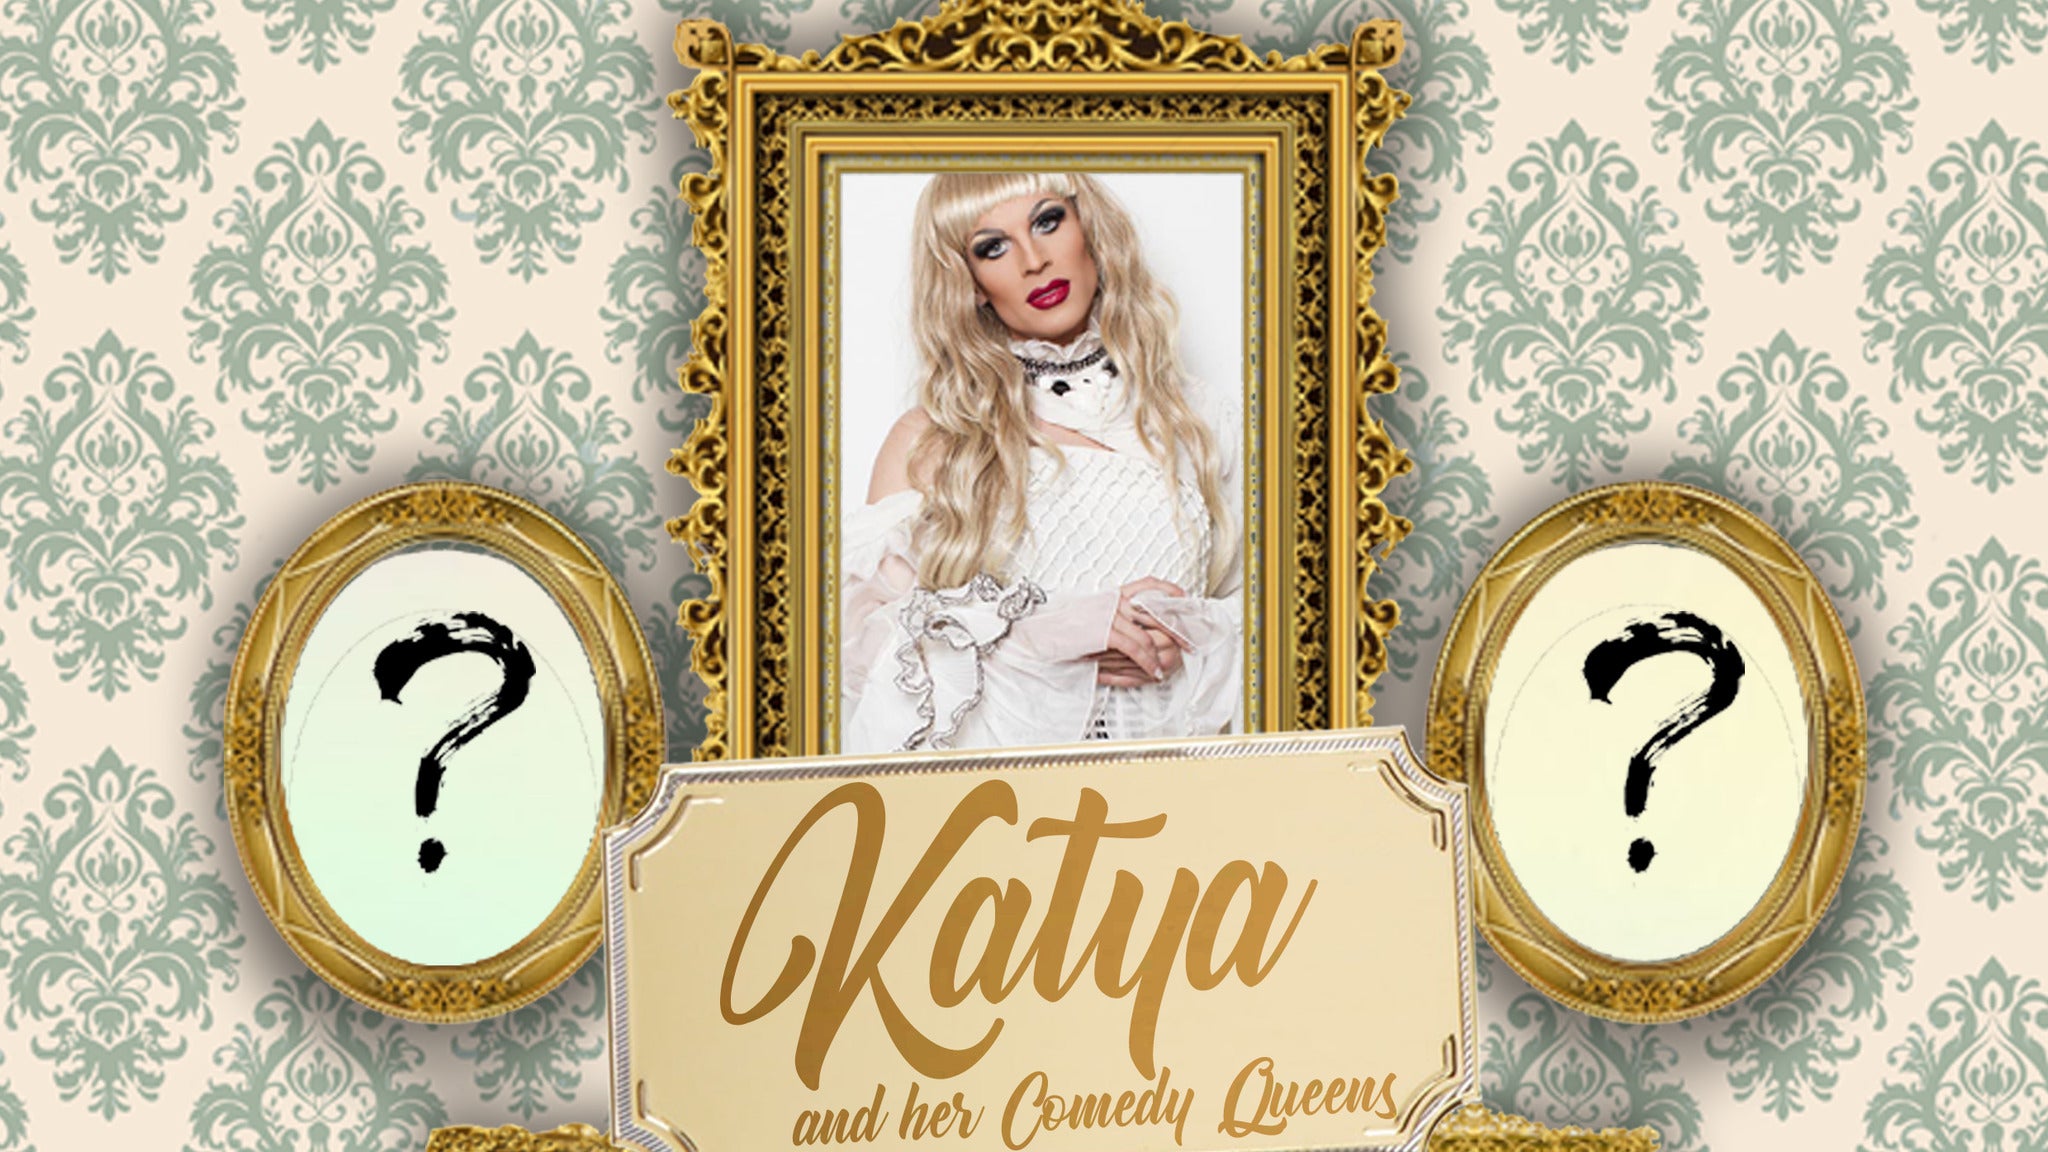 Katya & The Comedy Queens Event Title Pic